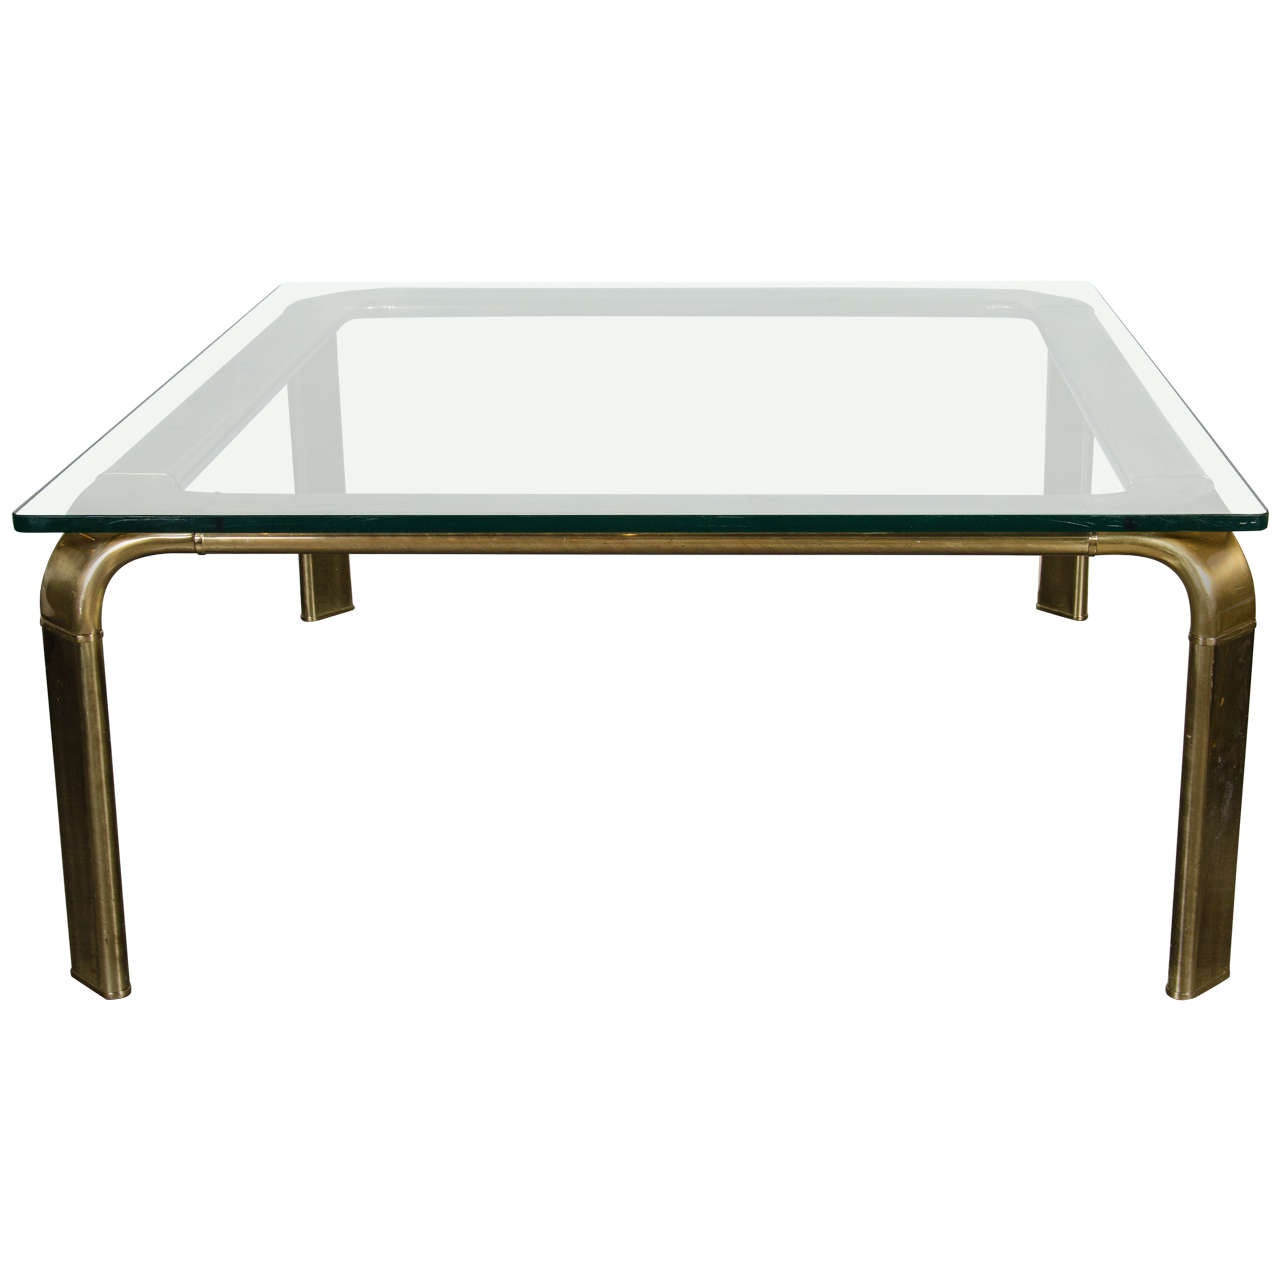 Mid-Century Modern Square Brass Cocktail Table in the Manner of Mastercraft